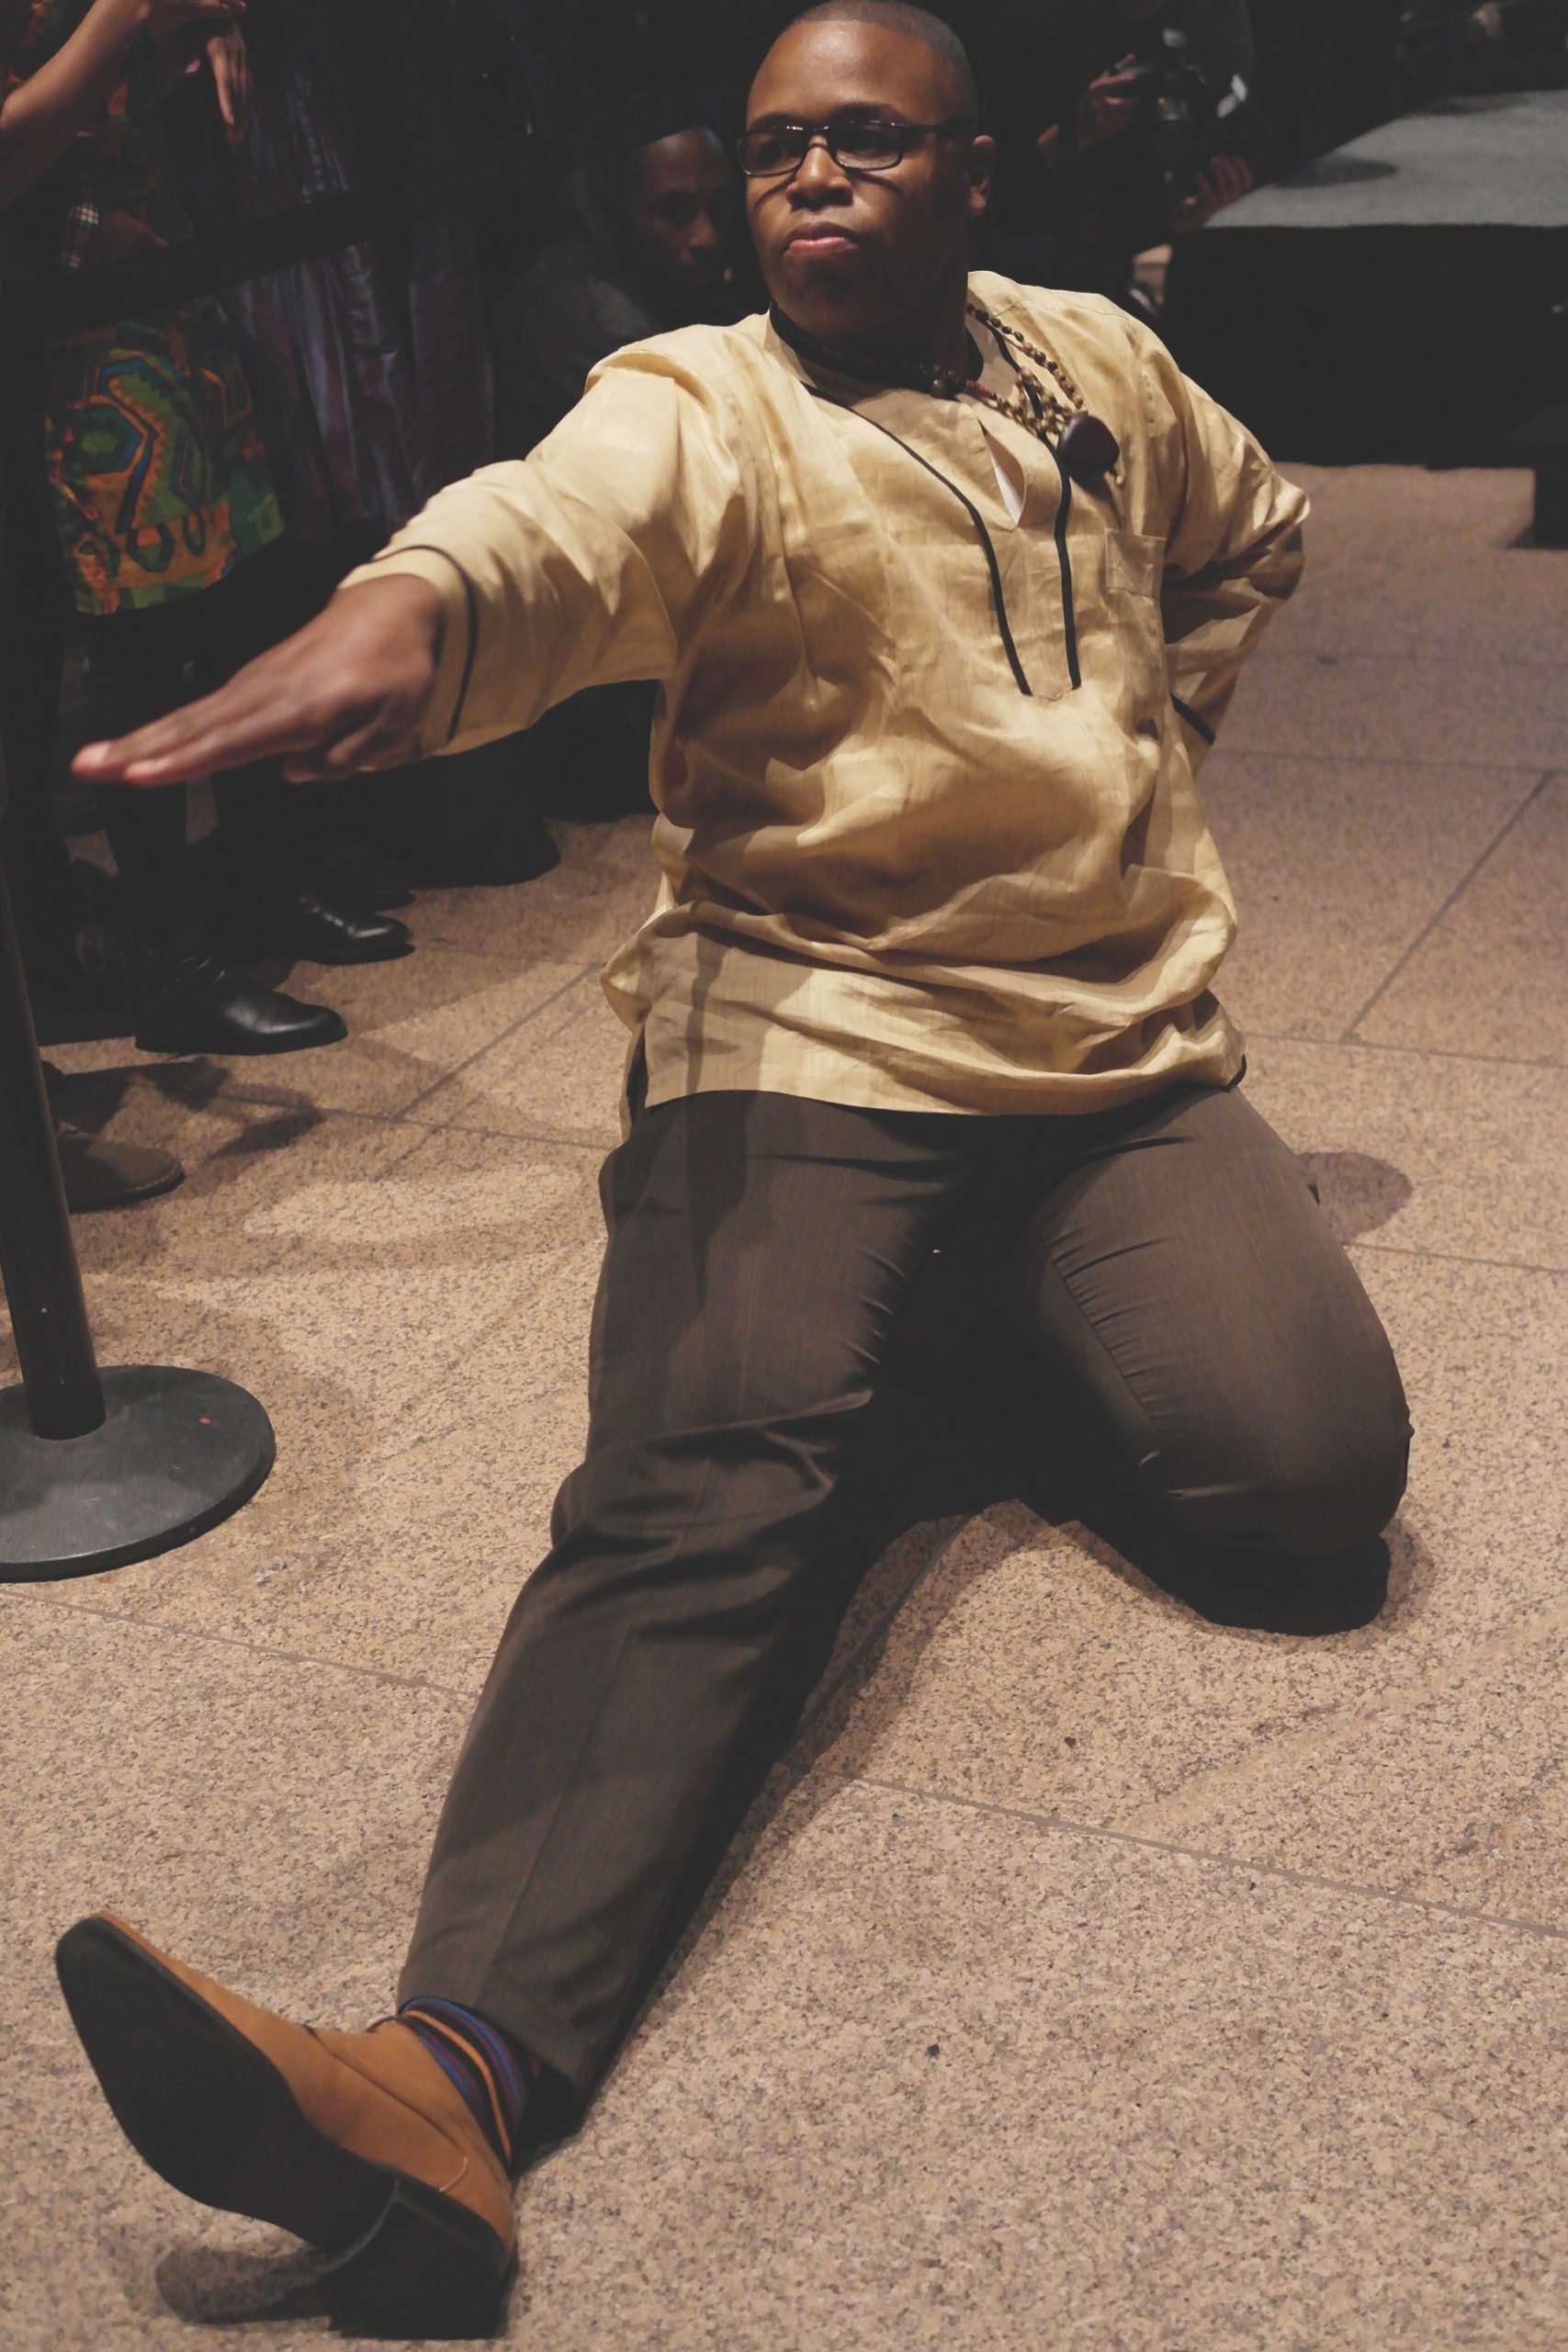 A dancer mid-pose on the floor with one leg out in front and the other tucked underneath.